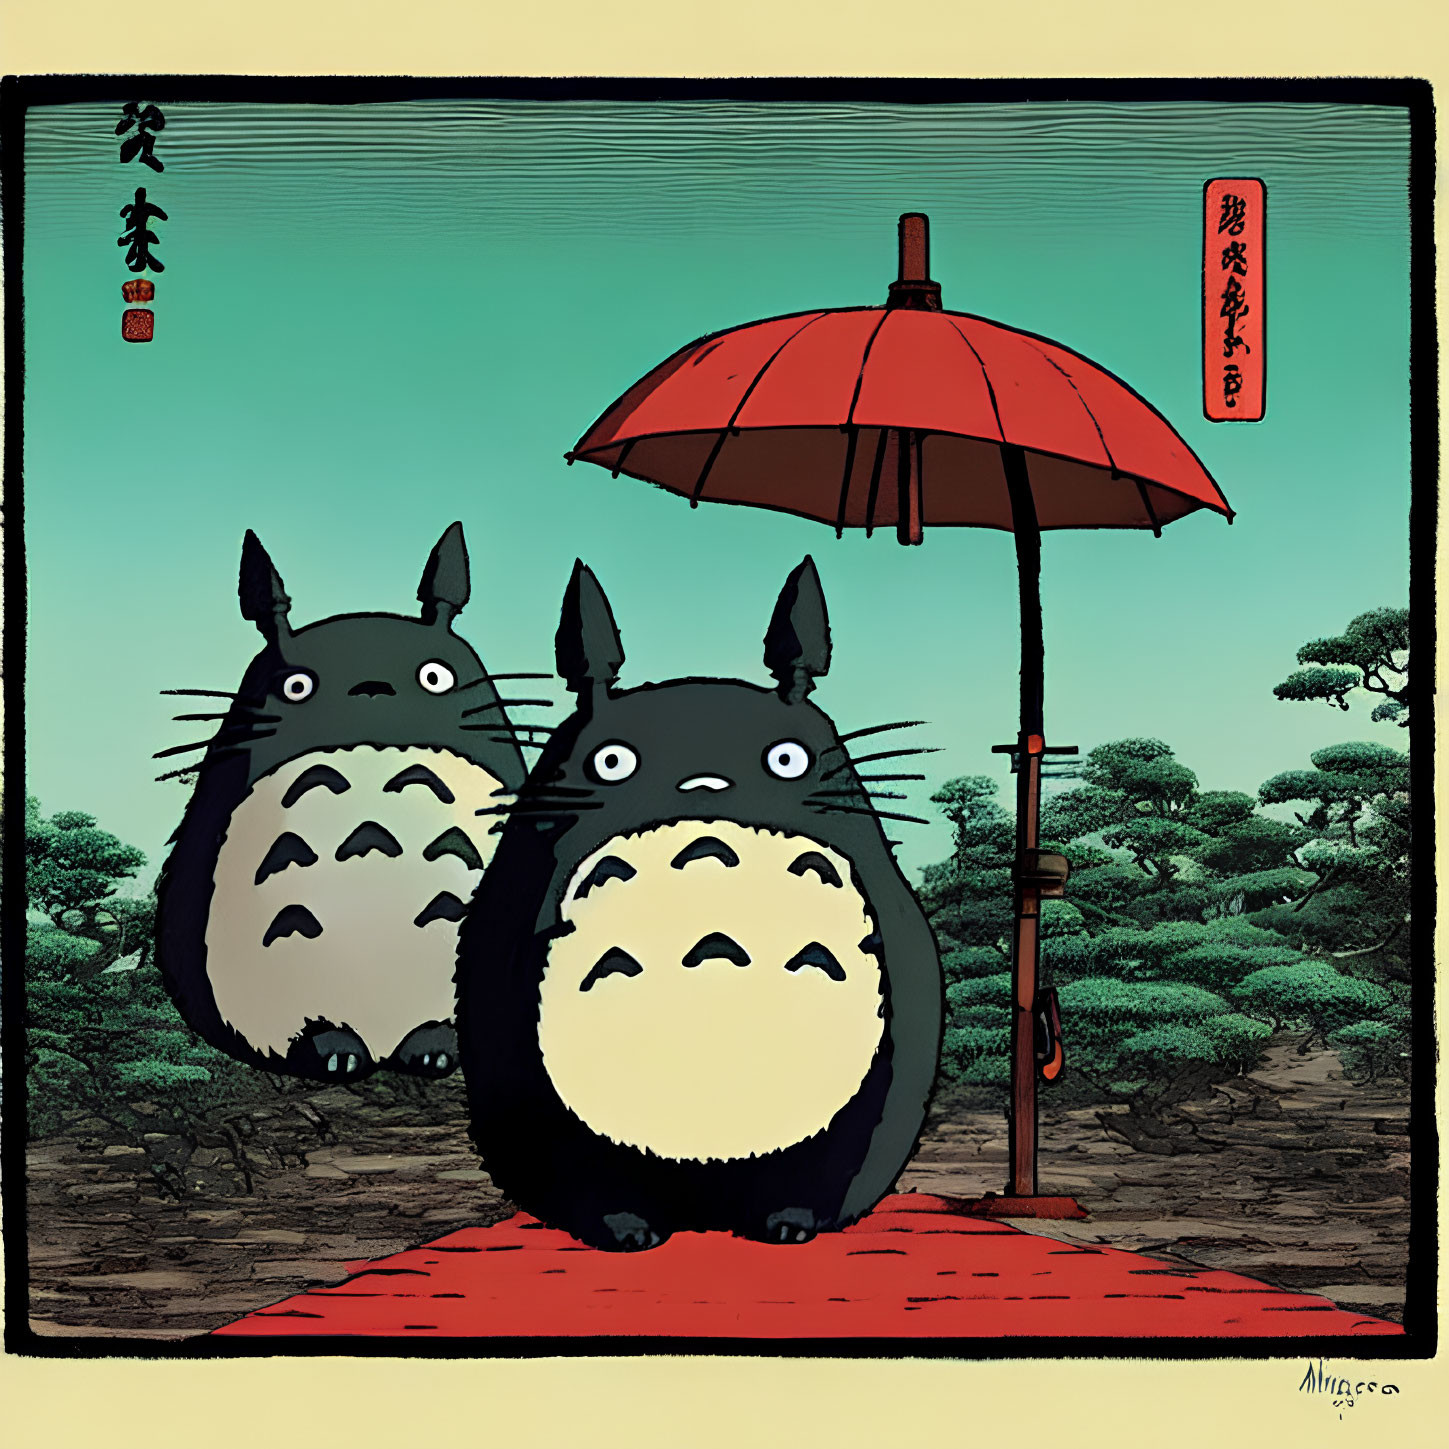 Two black cartoon cat creatures with large eyes near red umbrella in Asian-themed landscape